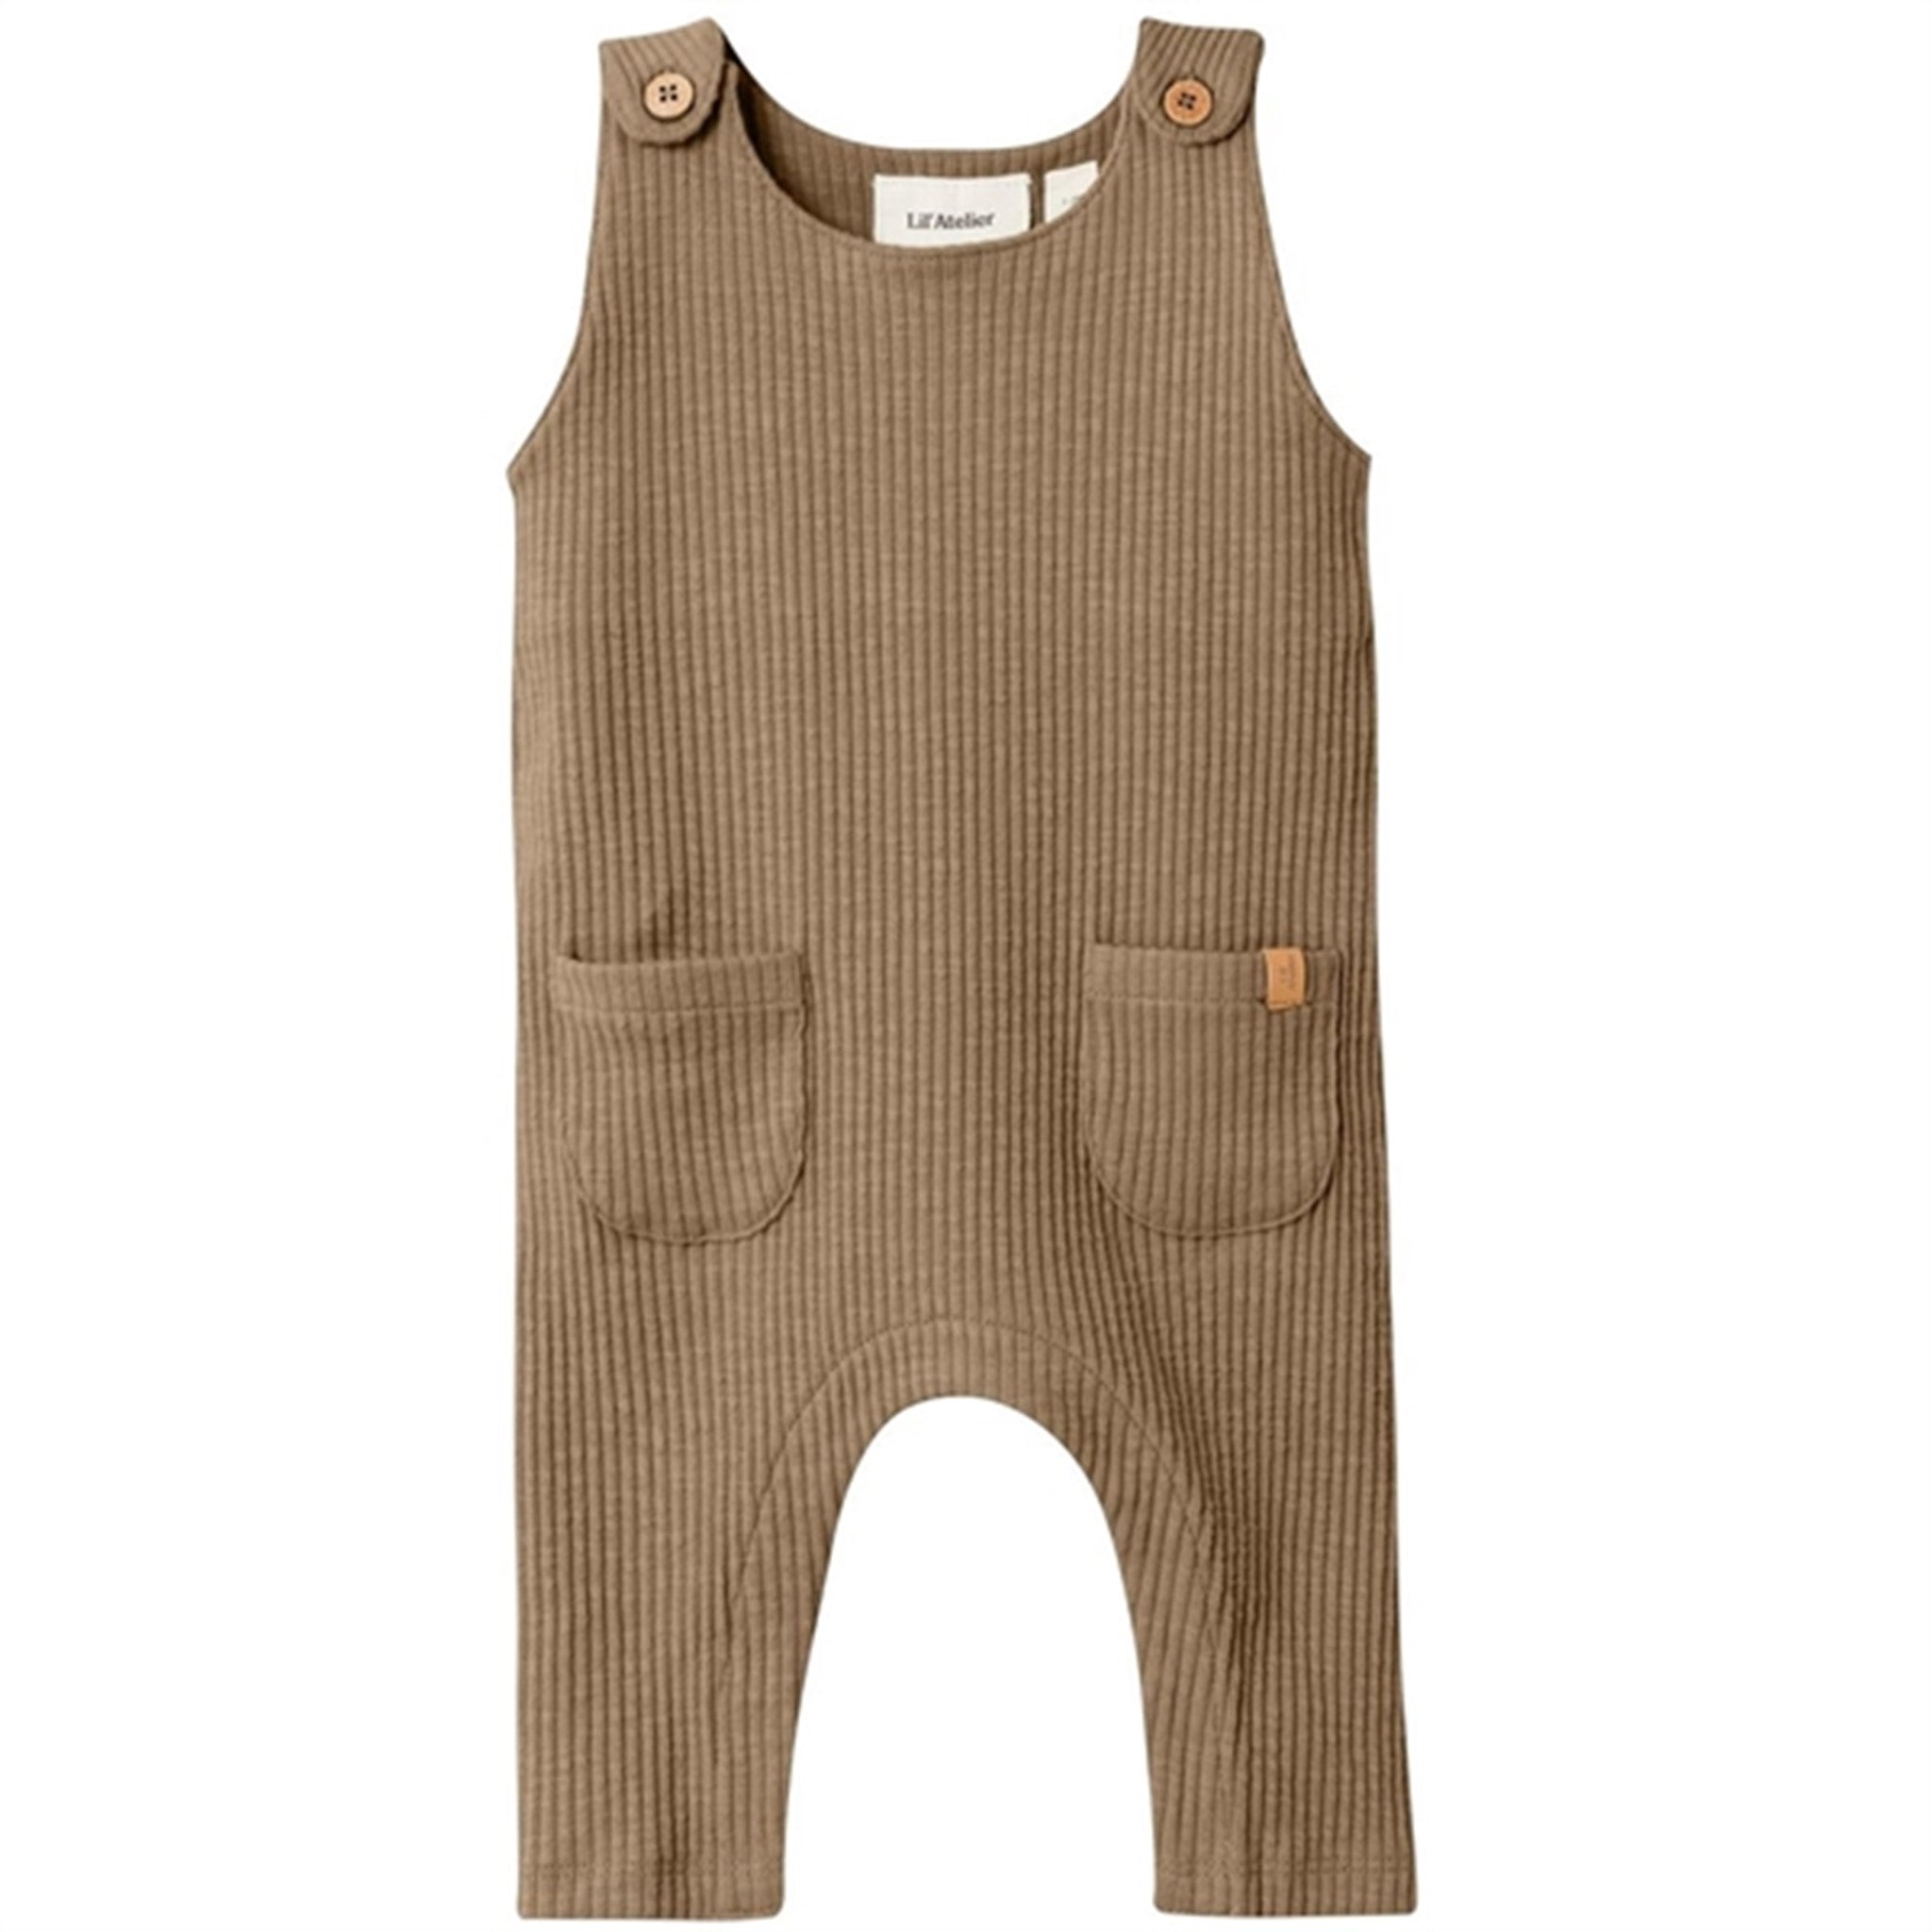 Lil'Atelier Tigers Eye Rajo Overall